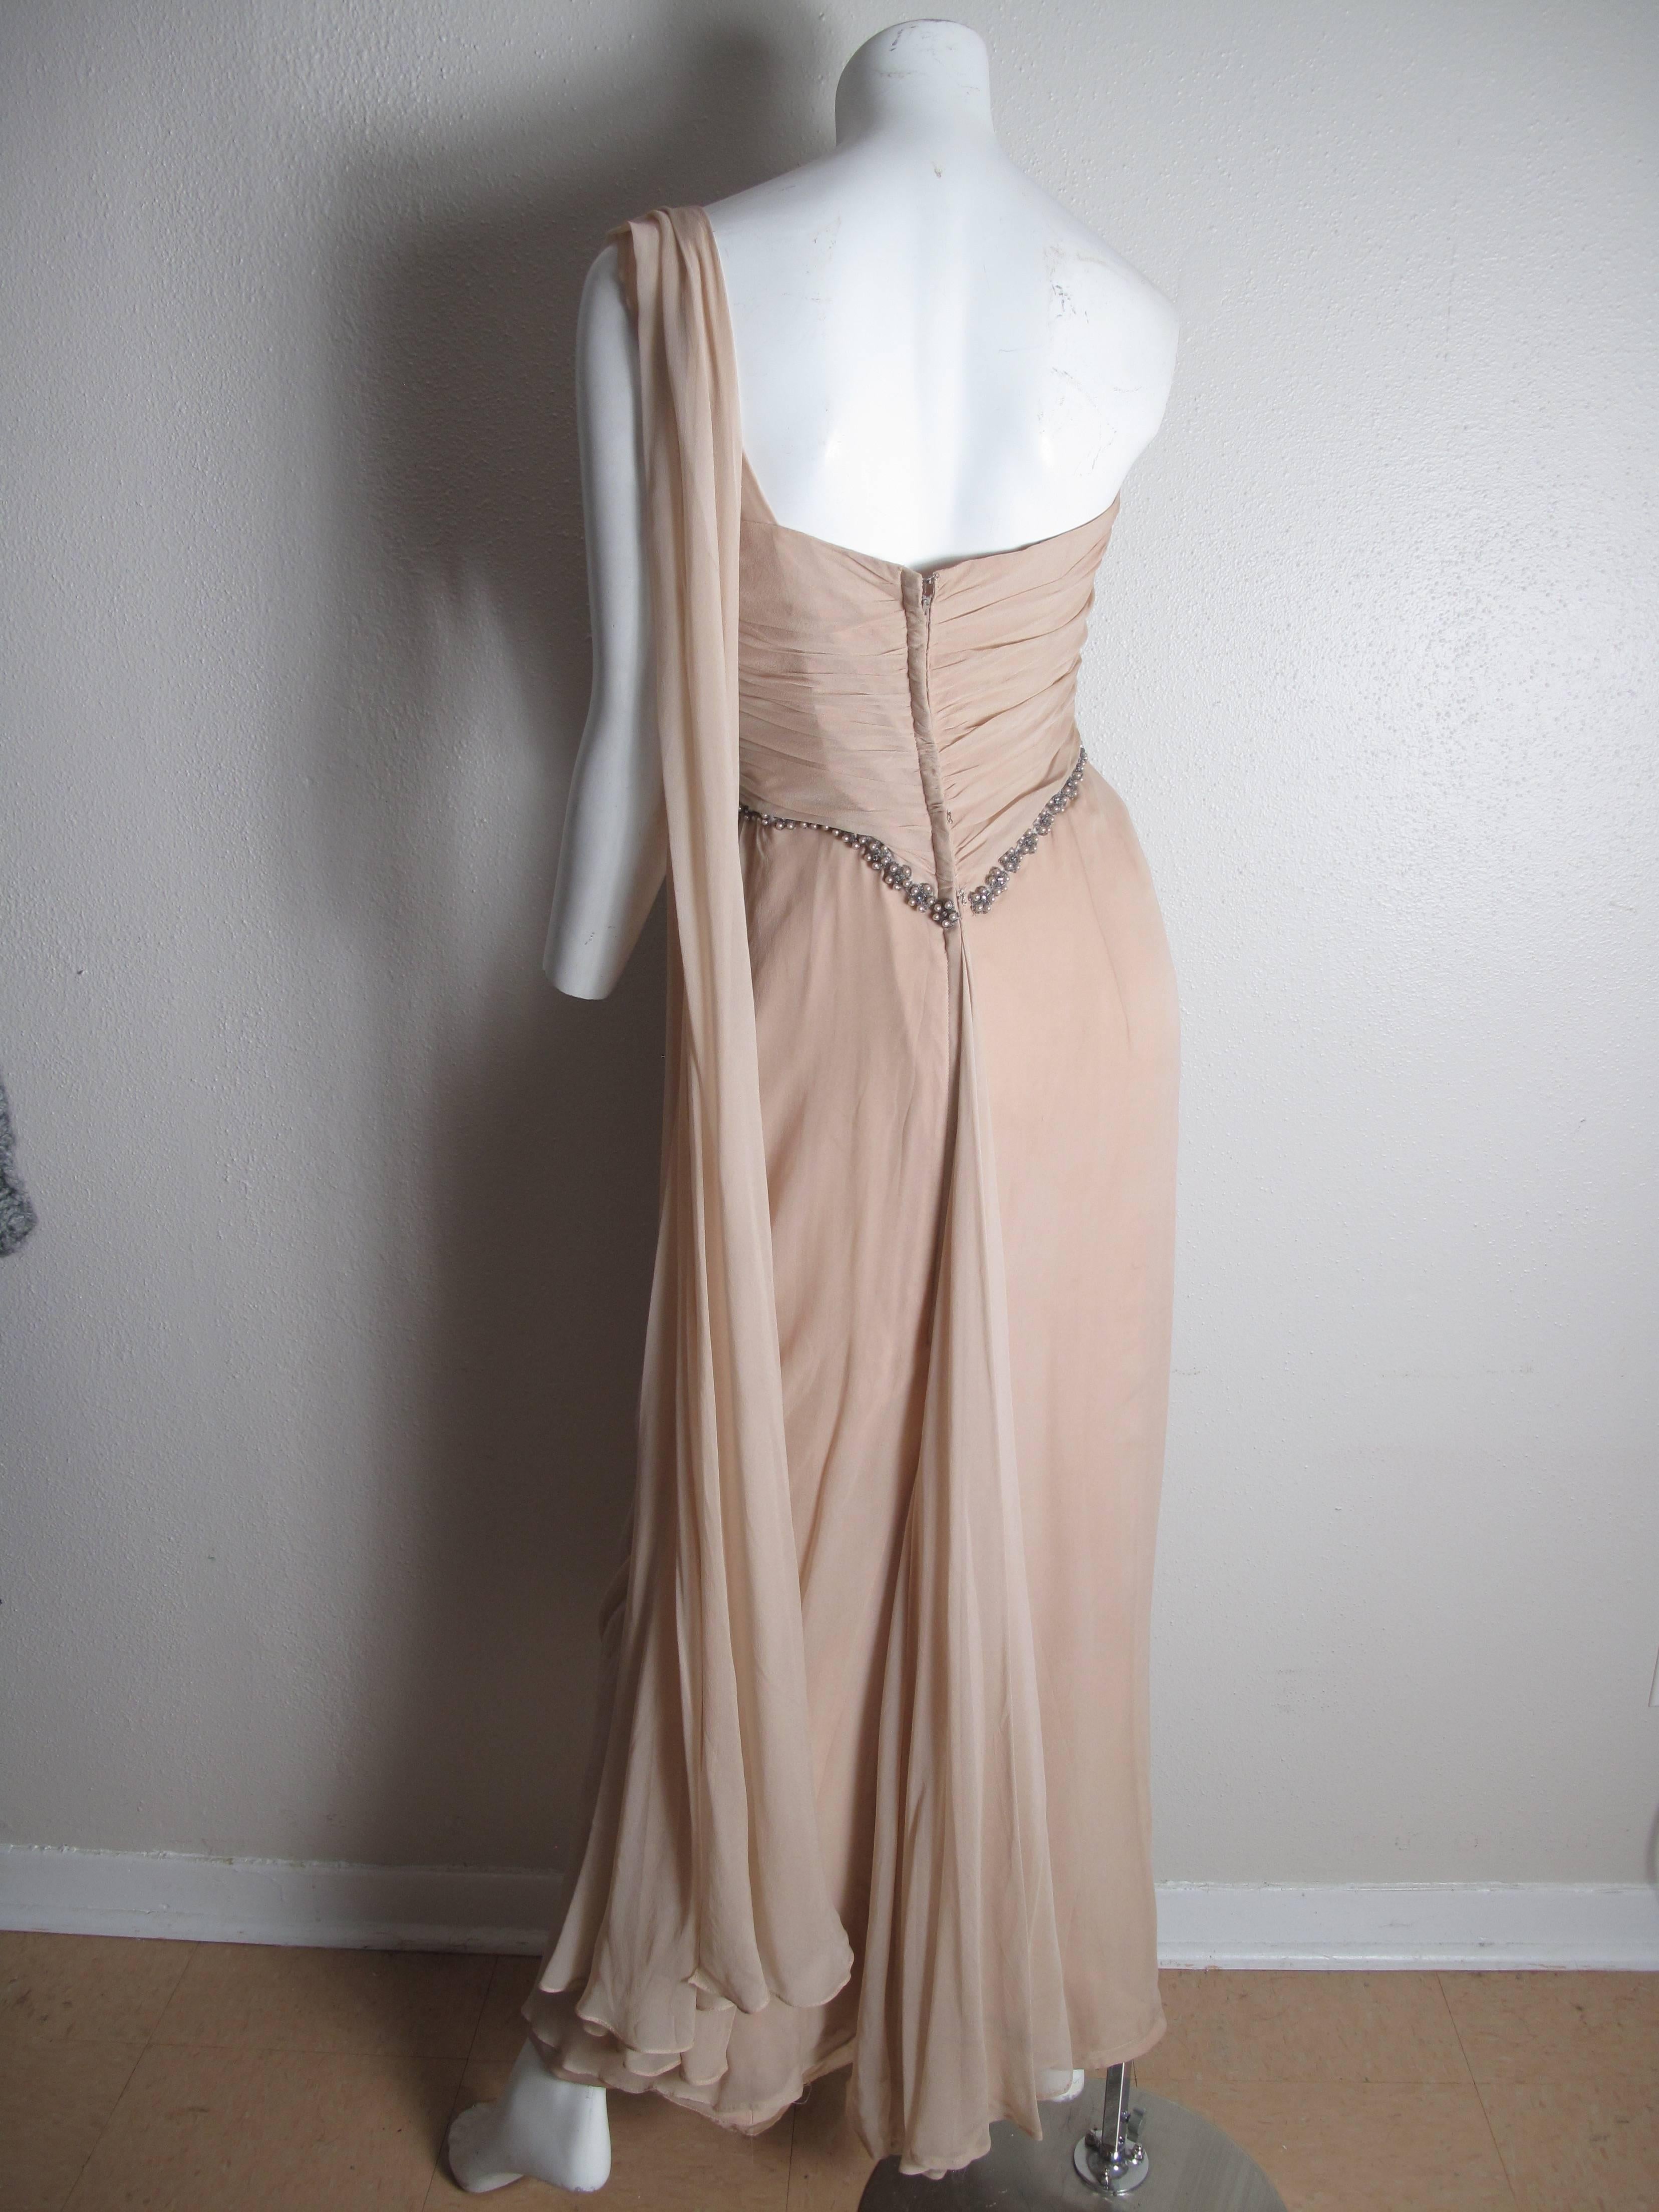 Emma Domb one shoulder chiffon gown with faux pearl, beading and rhinestone trim.  Condition: Good, some spots.  
Label Size 14/ fits current size 8 - 10 
We accept returns for refund, please see our terms.  We offer free ground shipping within the